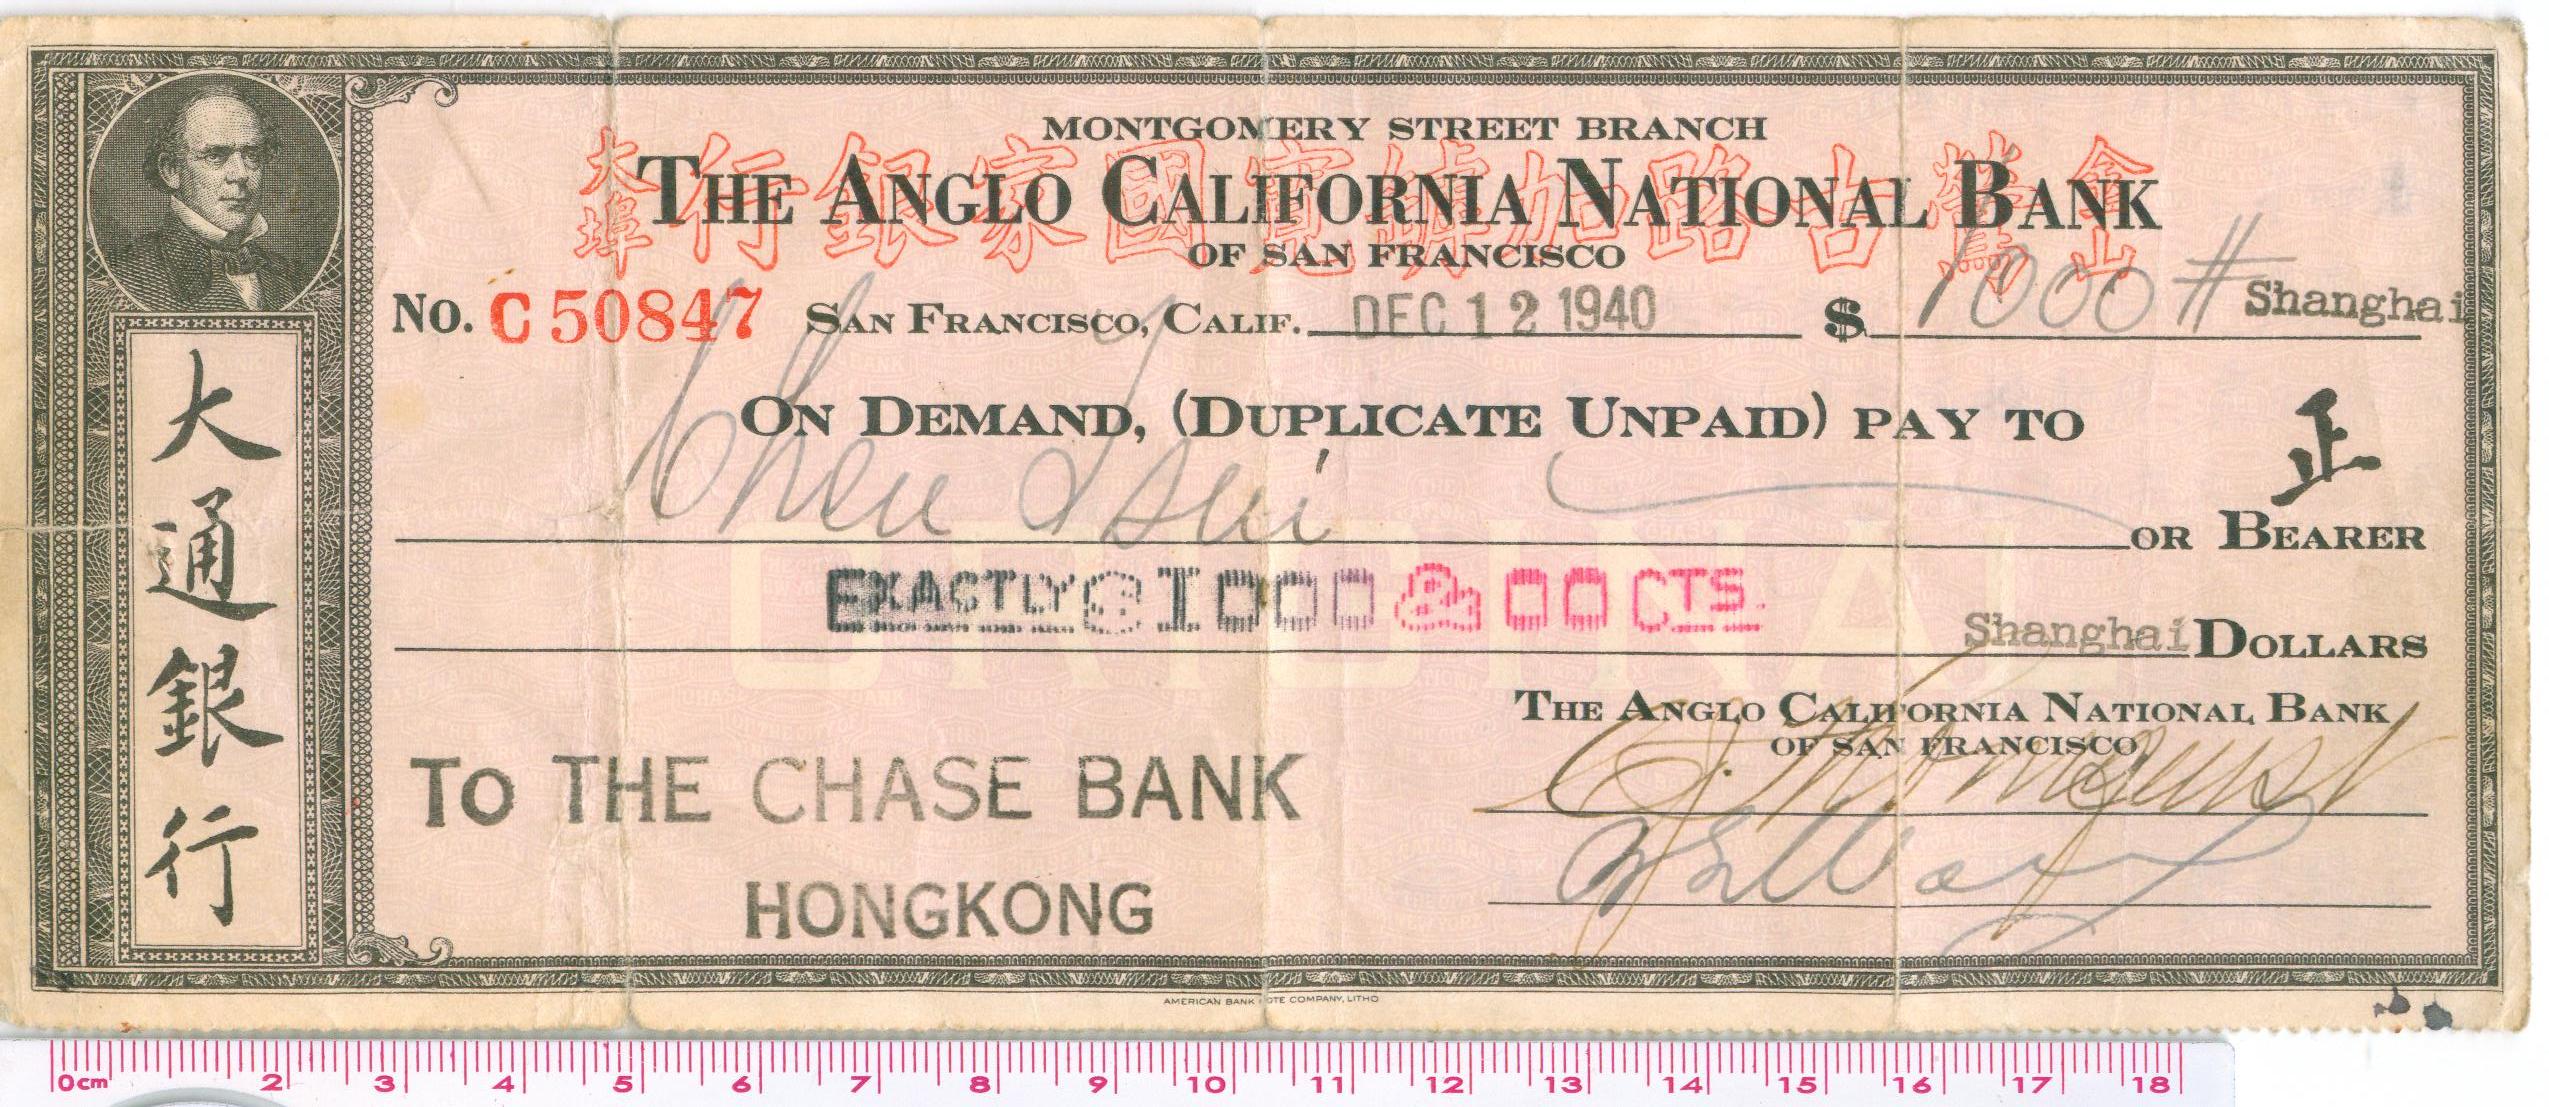 D2406, Check of The Anglo California National Bank (Shanghai), 1940